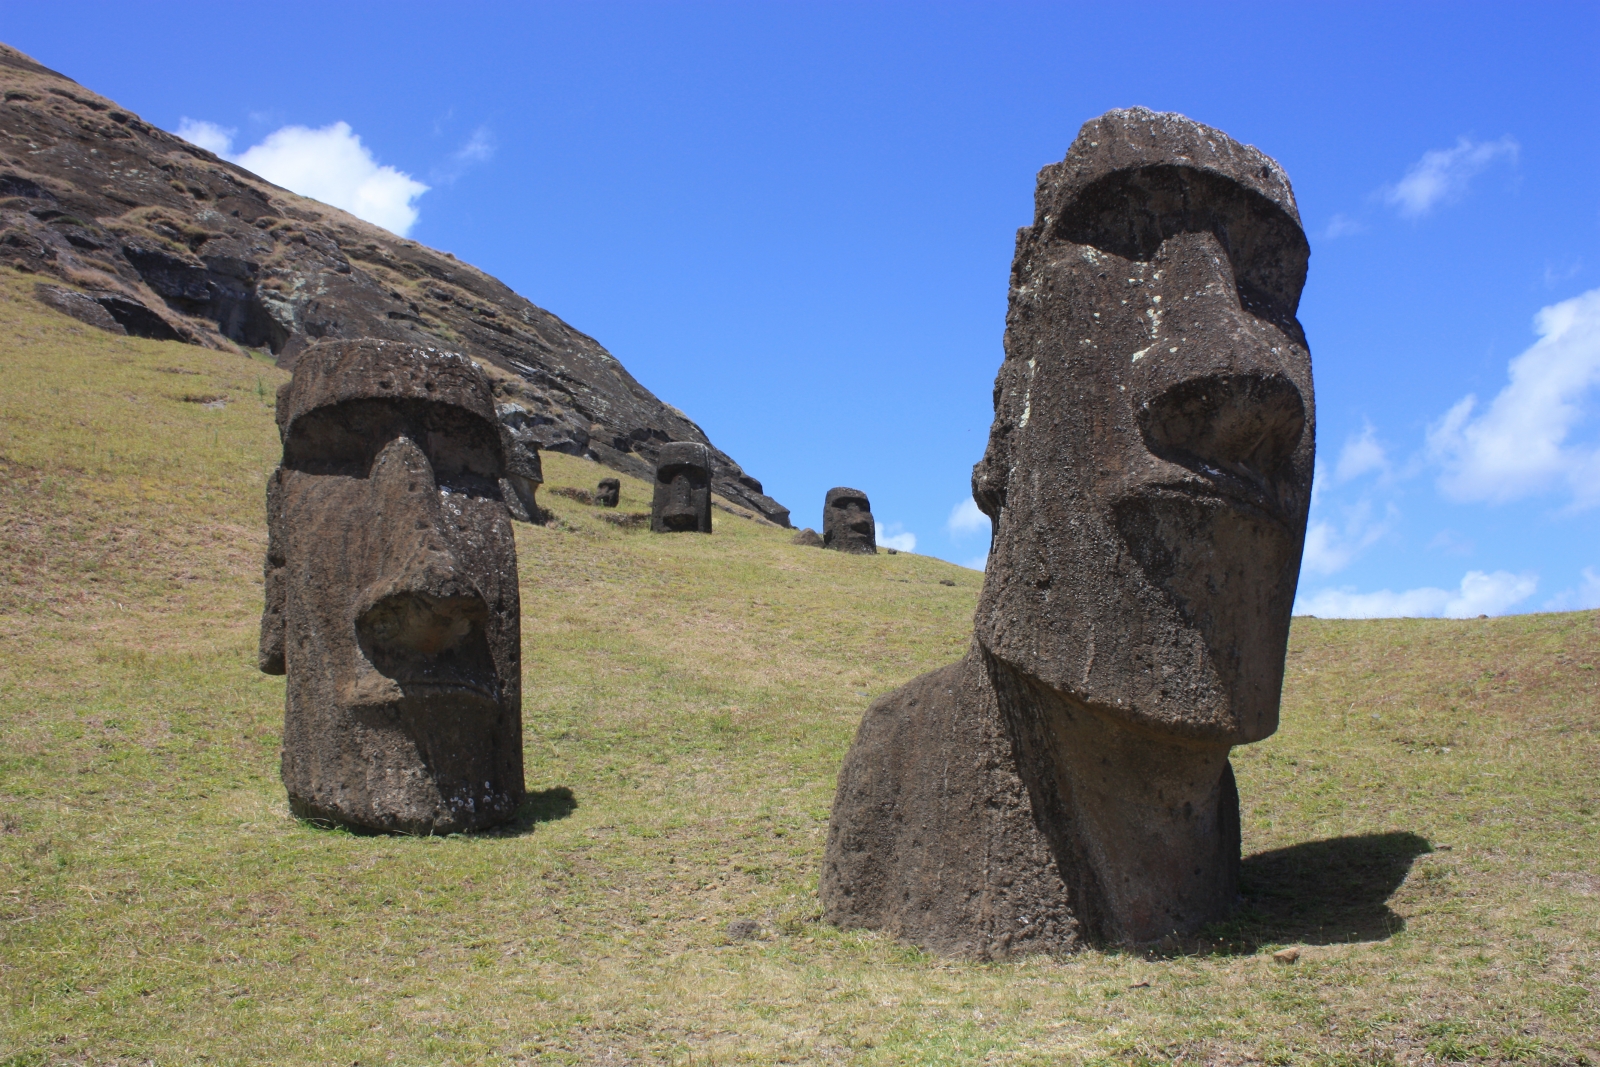 Ecocide: The Rapa Nui Cannibalism